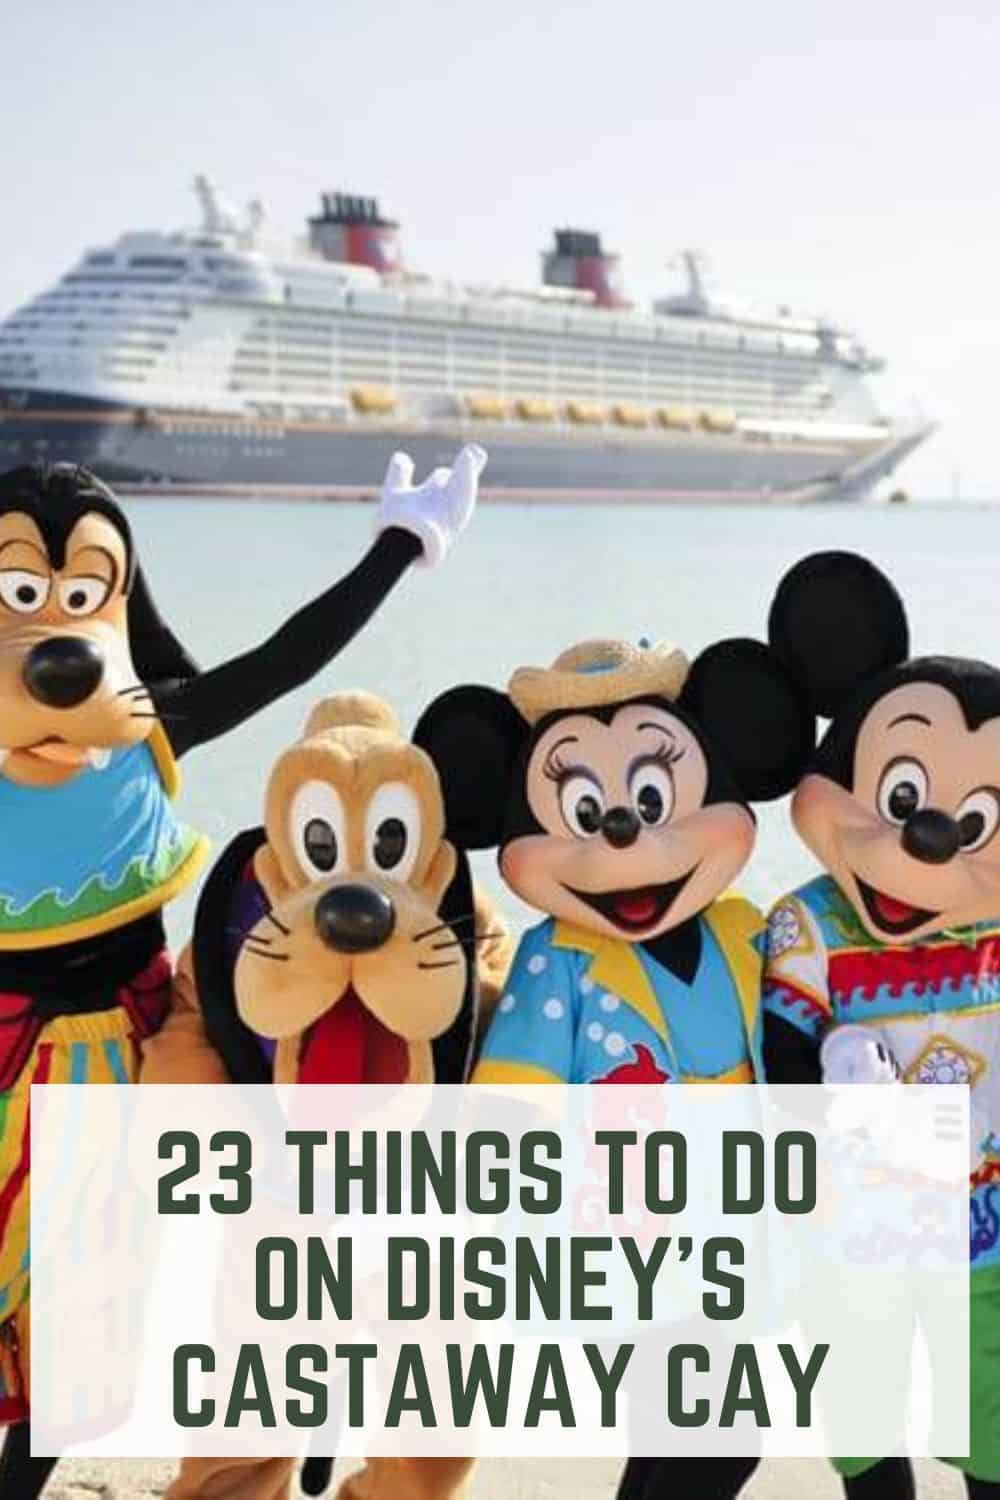 23 Things to do on Disney's Castaway Cay